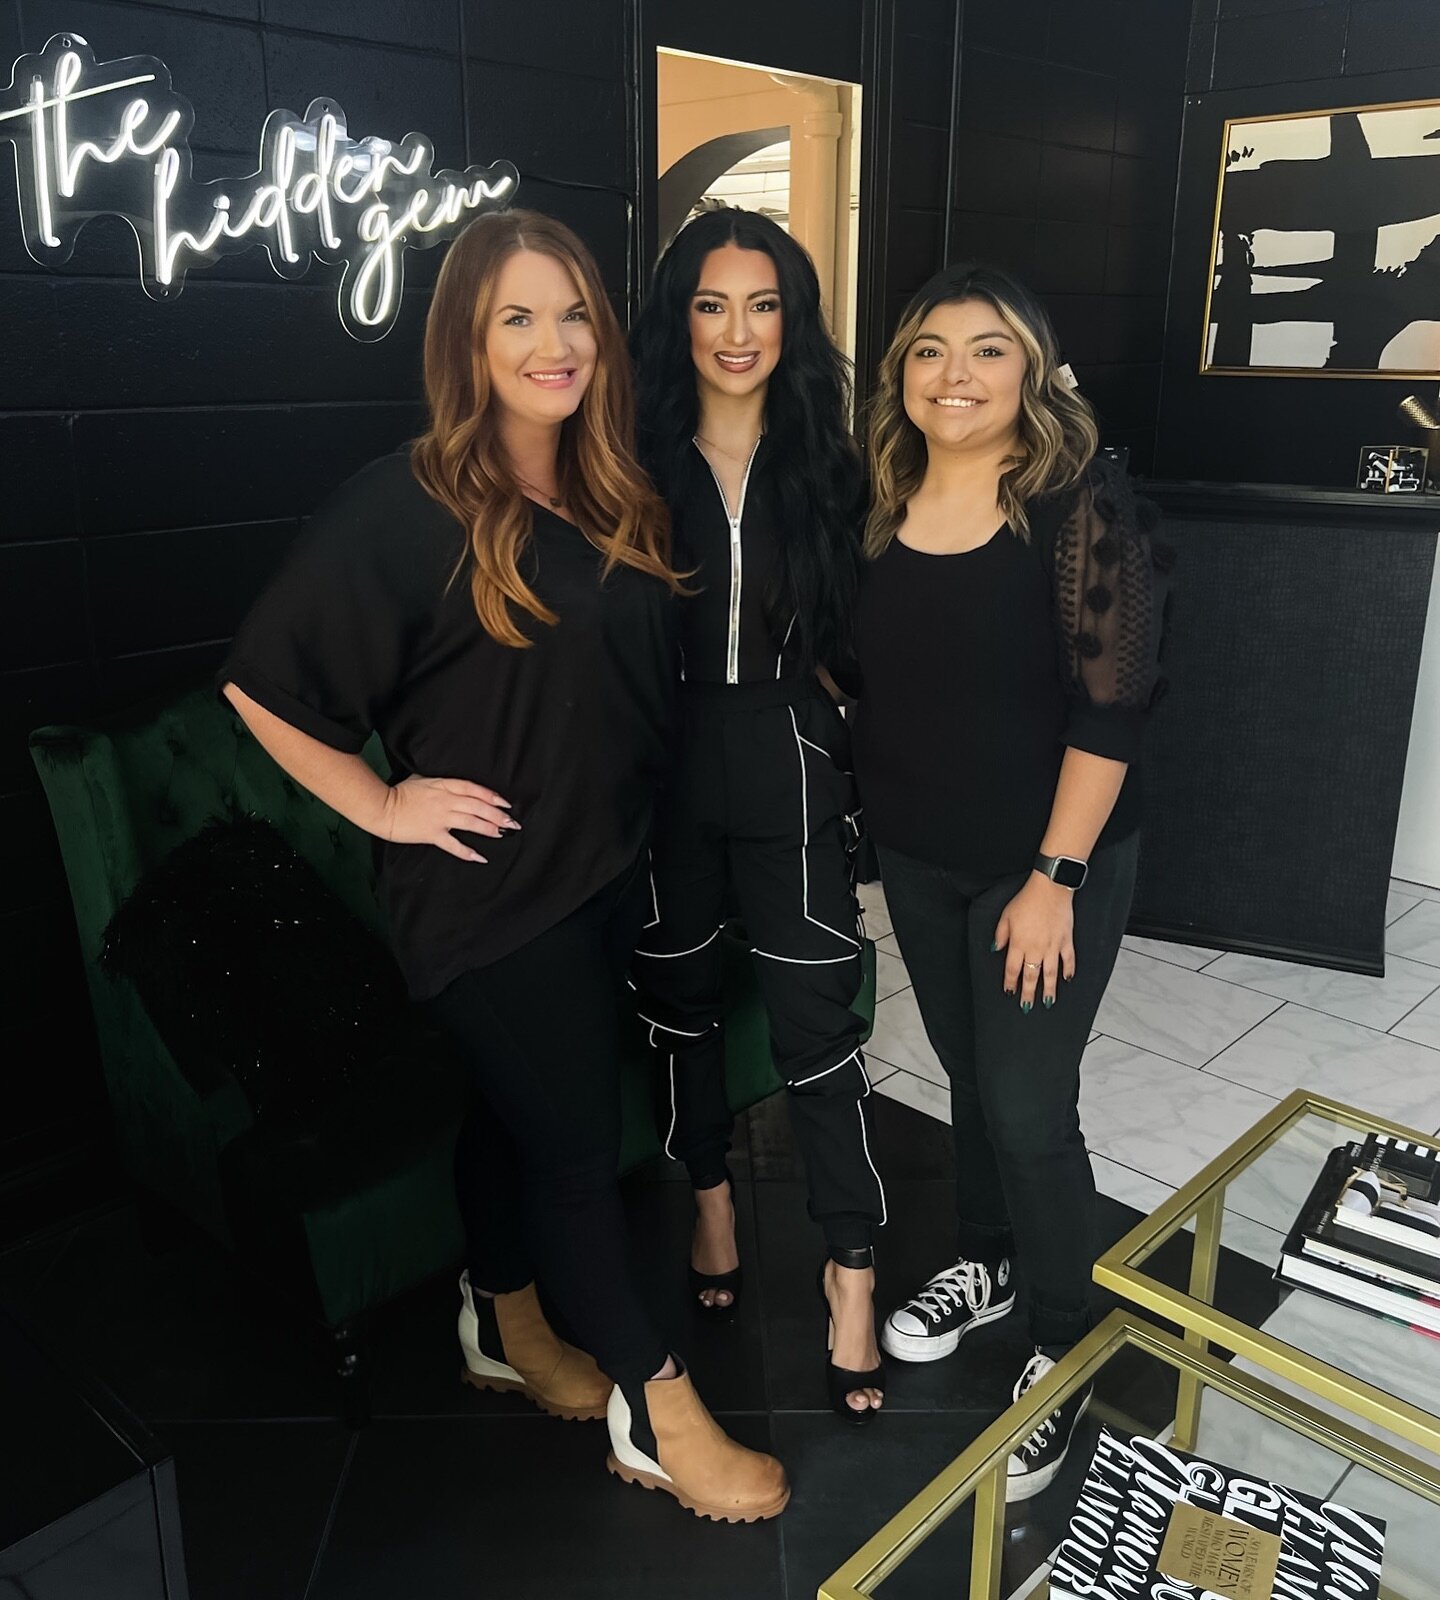 Our @onyx.thesalon clients are some AMAZING Women..but today we want to give a special shout out to this one! ✨

She is beautiful, smart, and seriously has the kindest heart.  I know Longview is proud to have you representing us. 🖤

@frannylolo Good